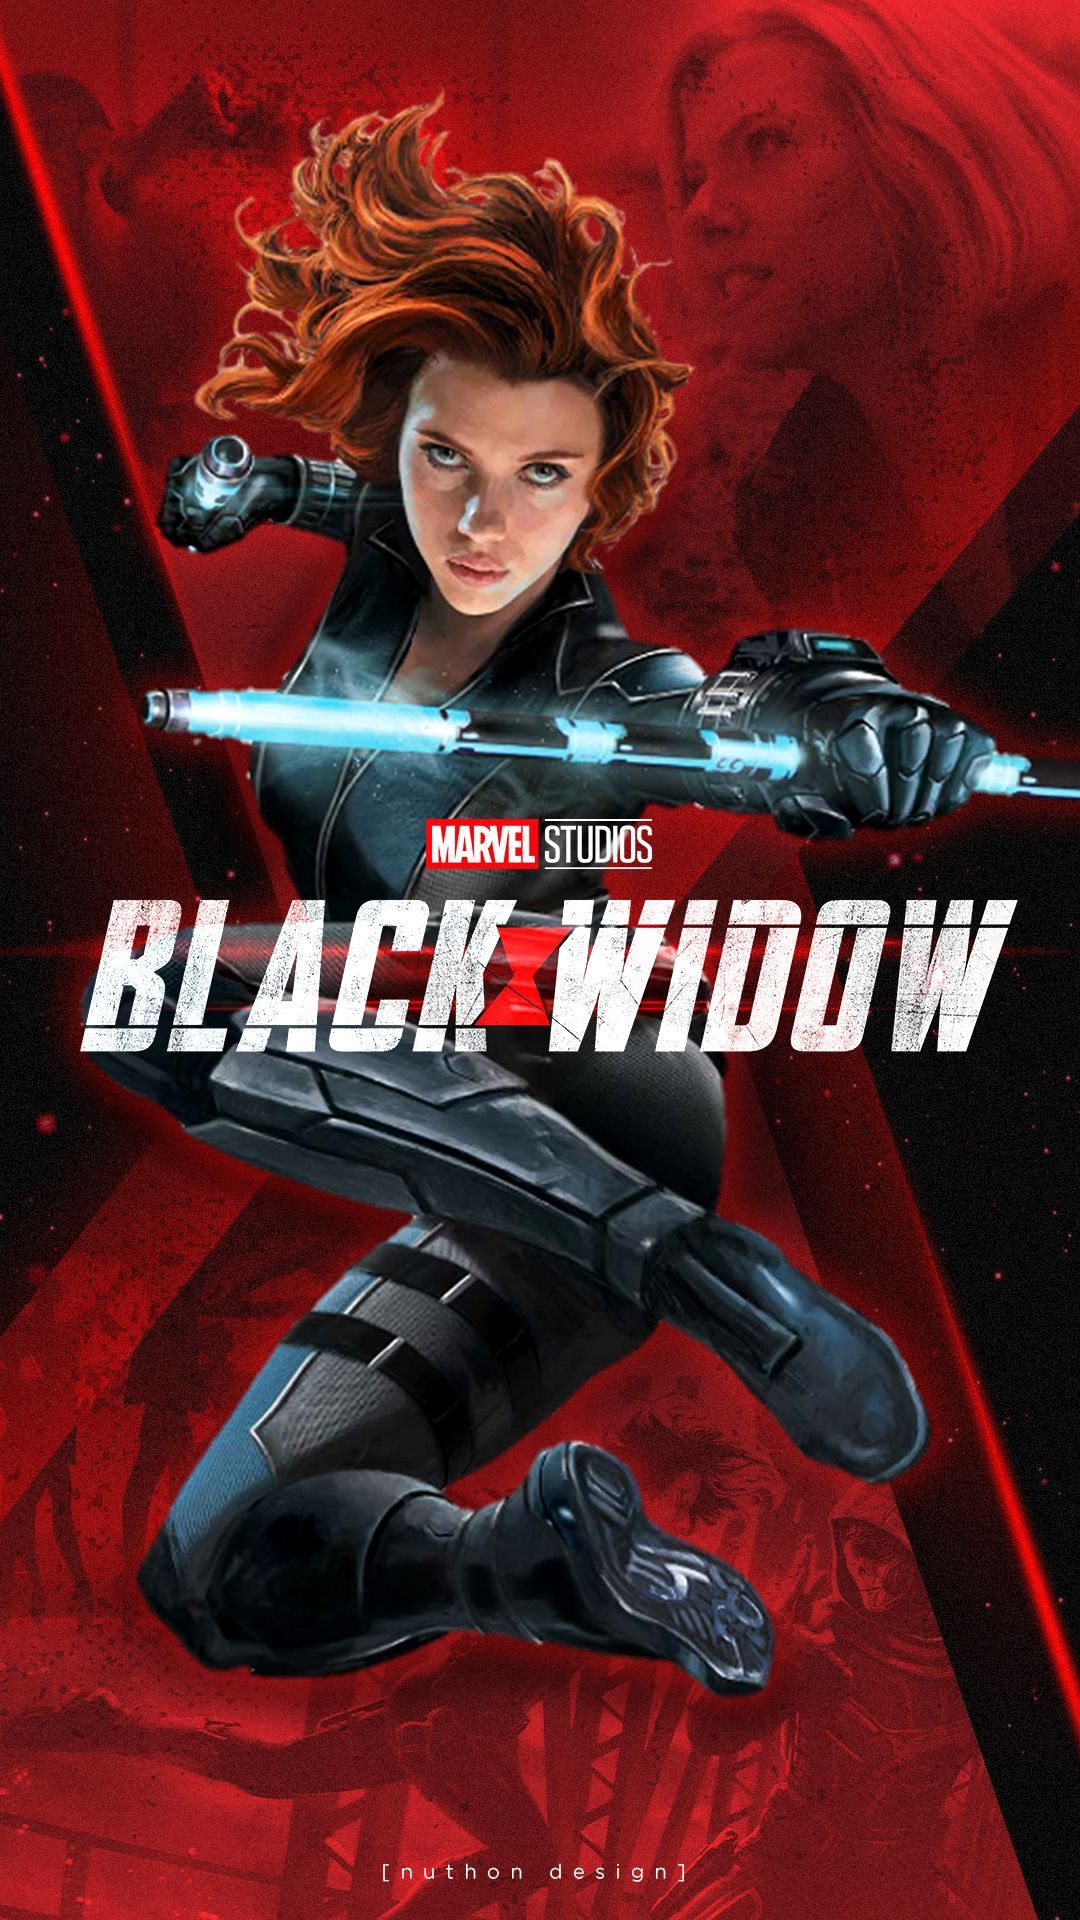 Black Widow Movie Poster Wallpapers